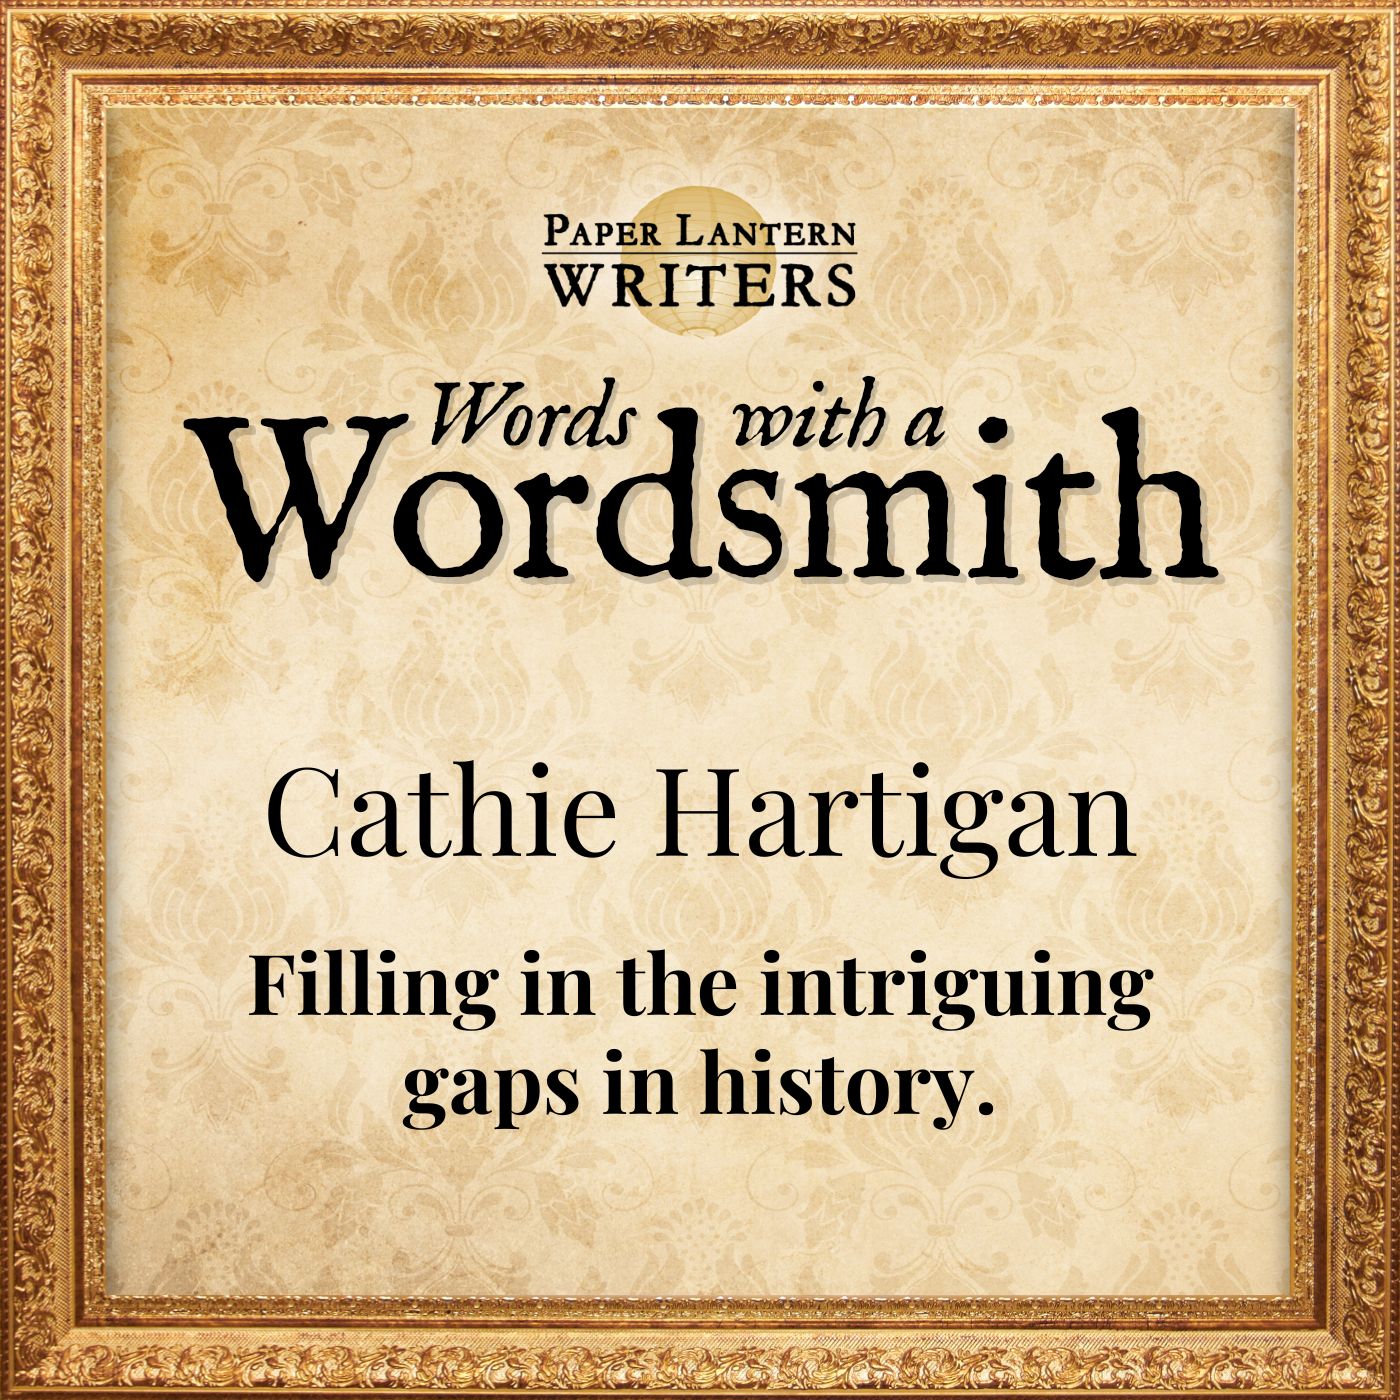 Words with a Wordsmith Cathie Hartigan